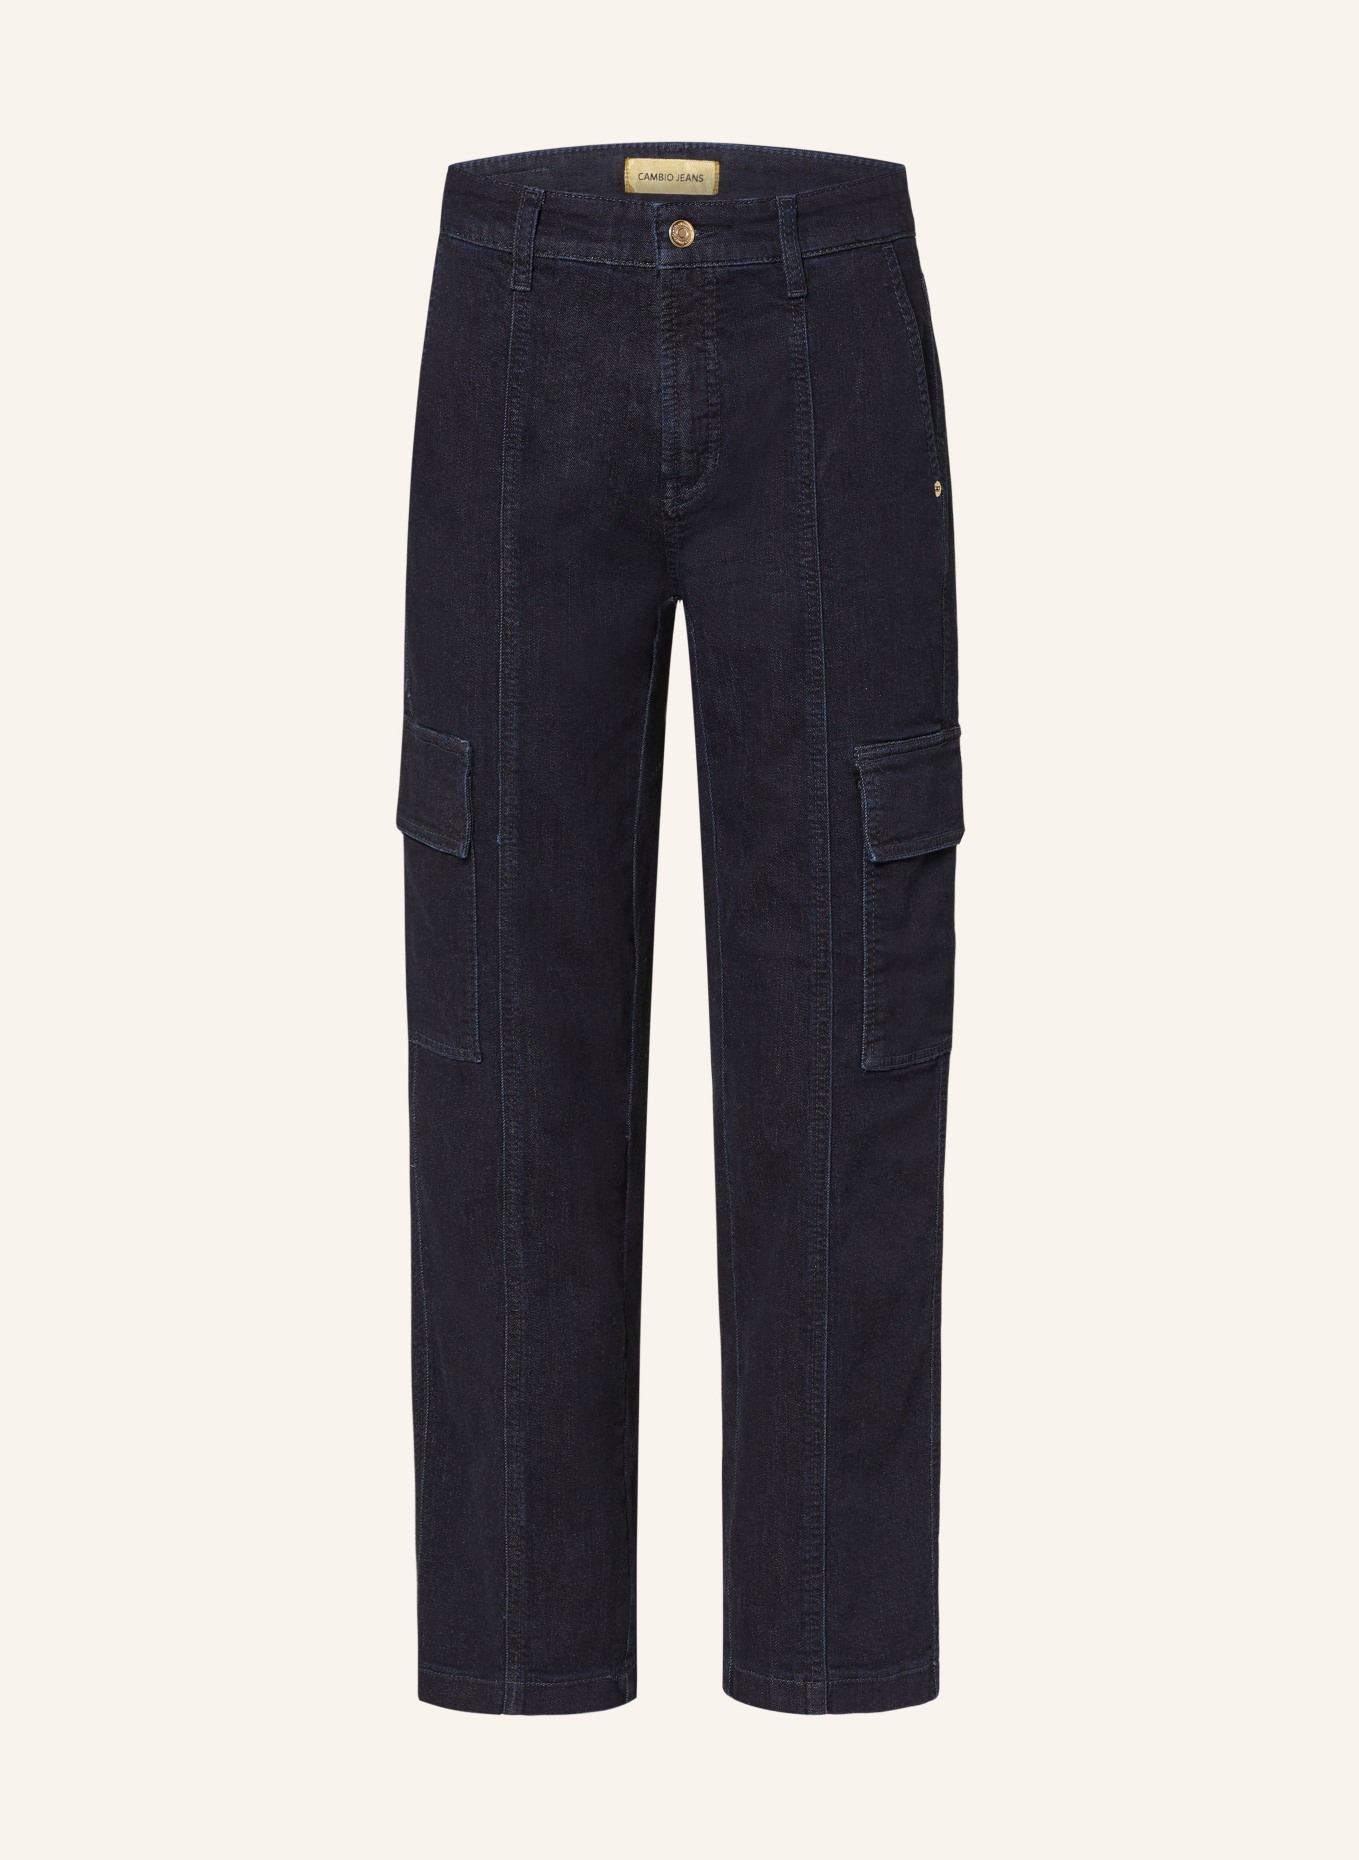 CAMBIO Cargo jeans GAIA, Color: 5006 modern rinsed (Image 1)